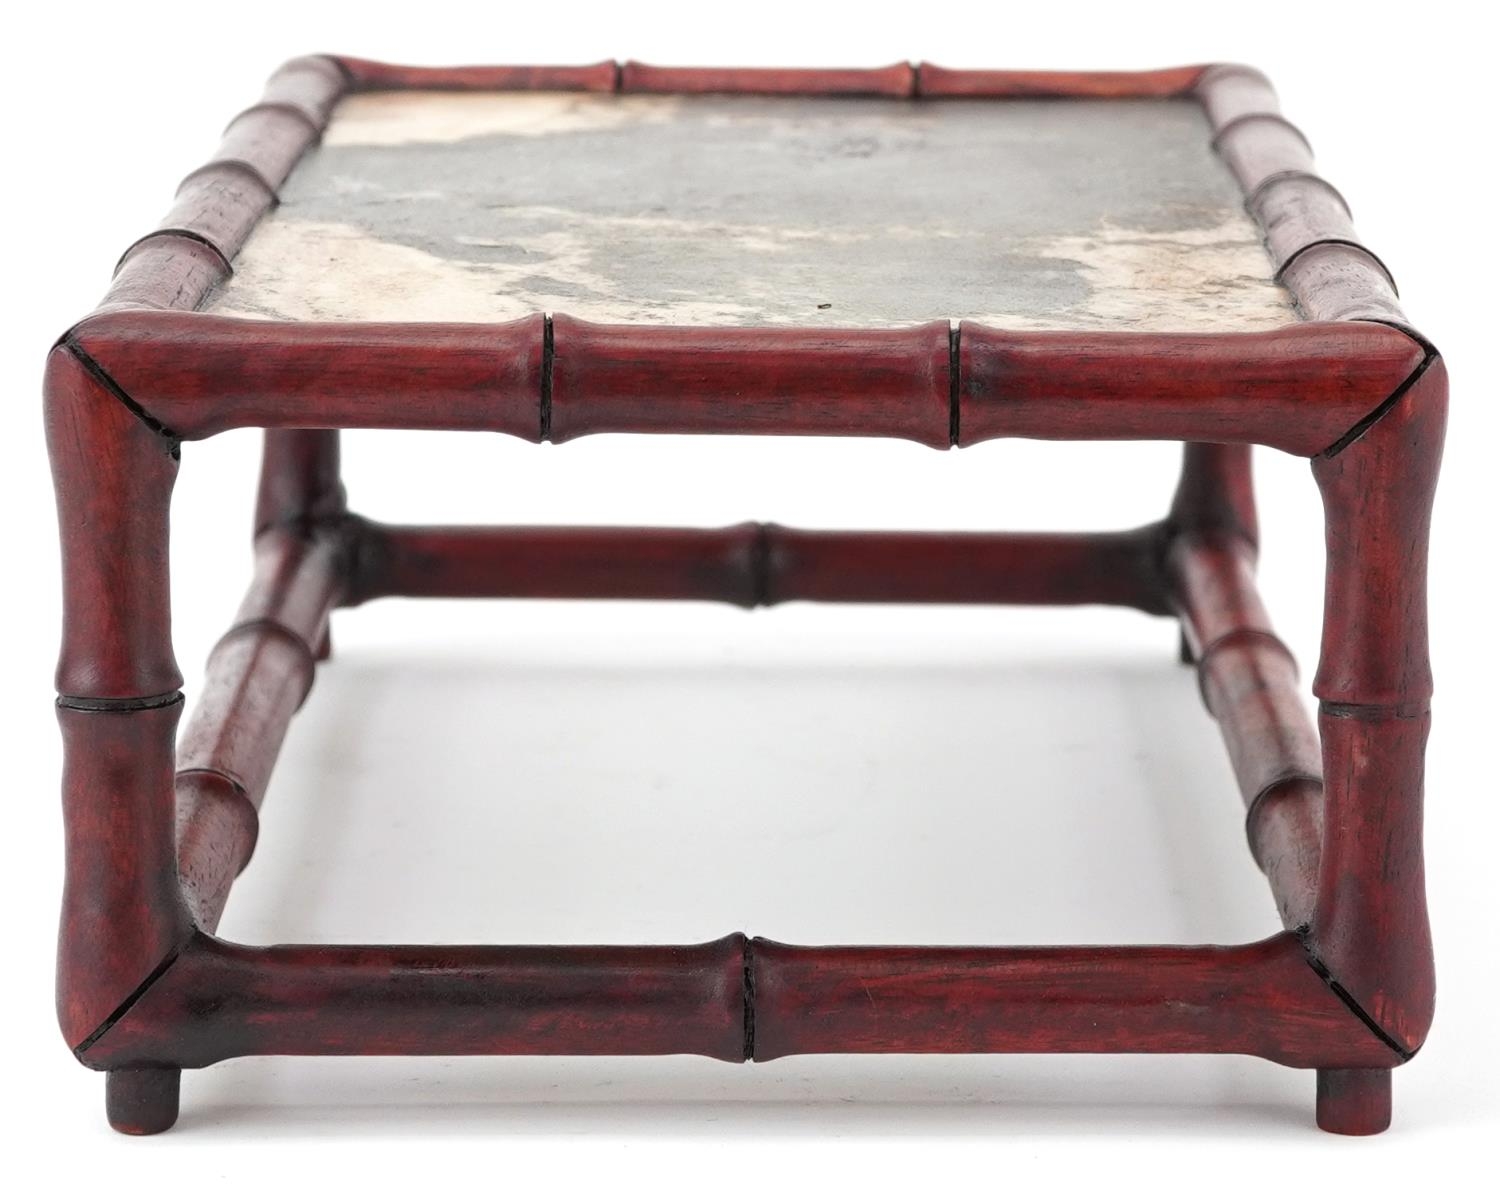 Chinese faux bamboo hardwood and hardstone stand, 10.5cm H x 29cm W x 17.5cm D - Image 4 of 7